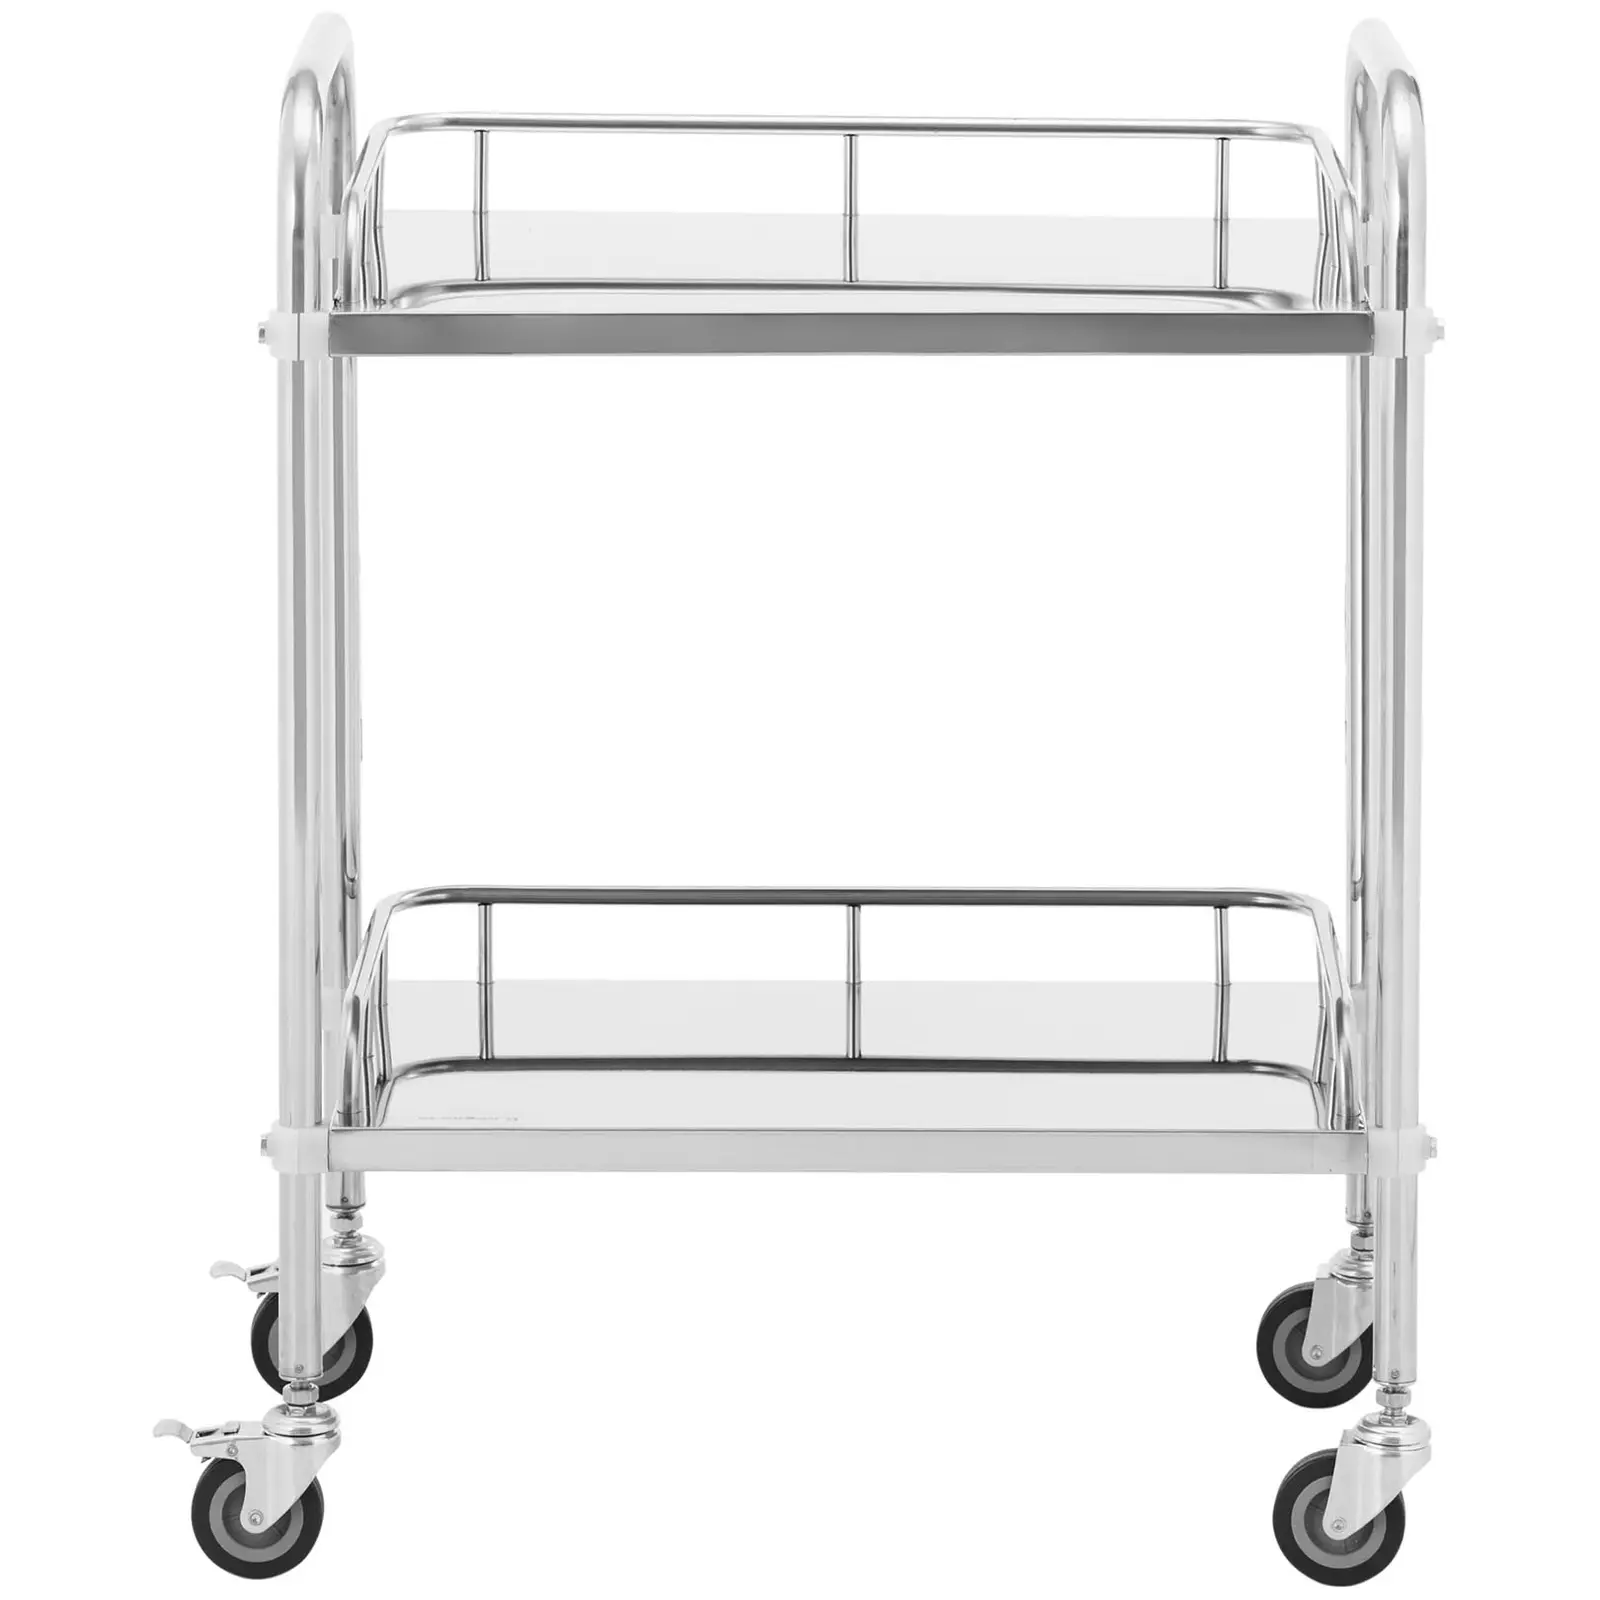 Laboratory Trolley - stainless steel - 2 shelves each 55 x 36 x 2.5 cm - 10 kg